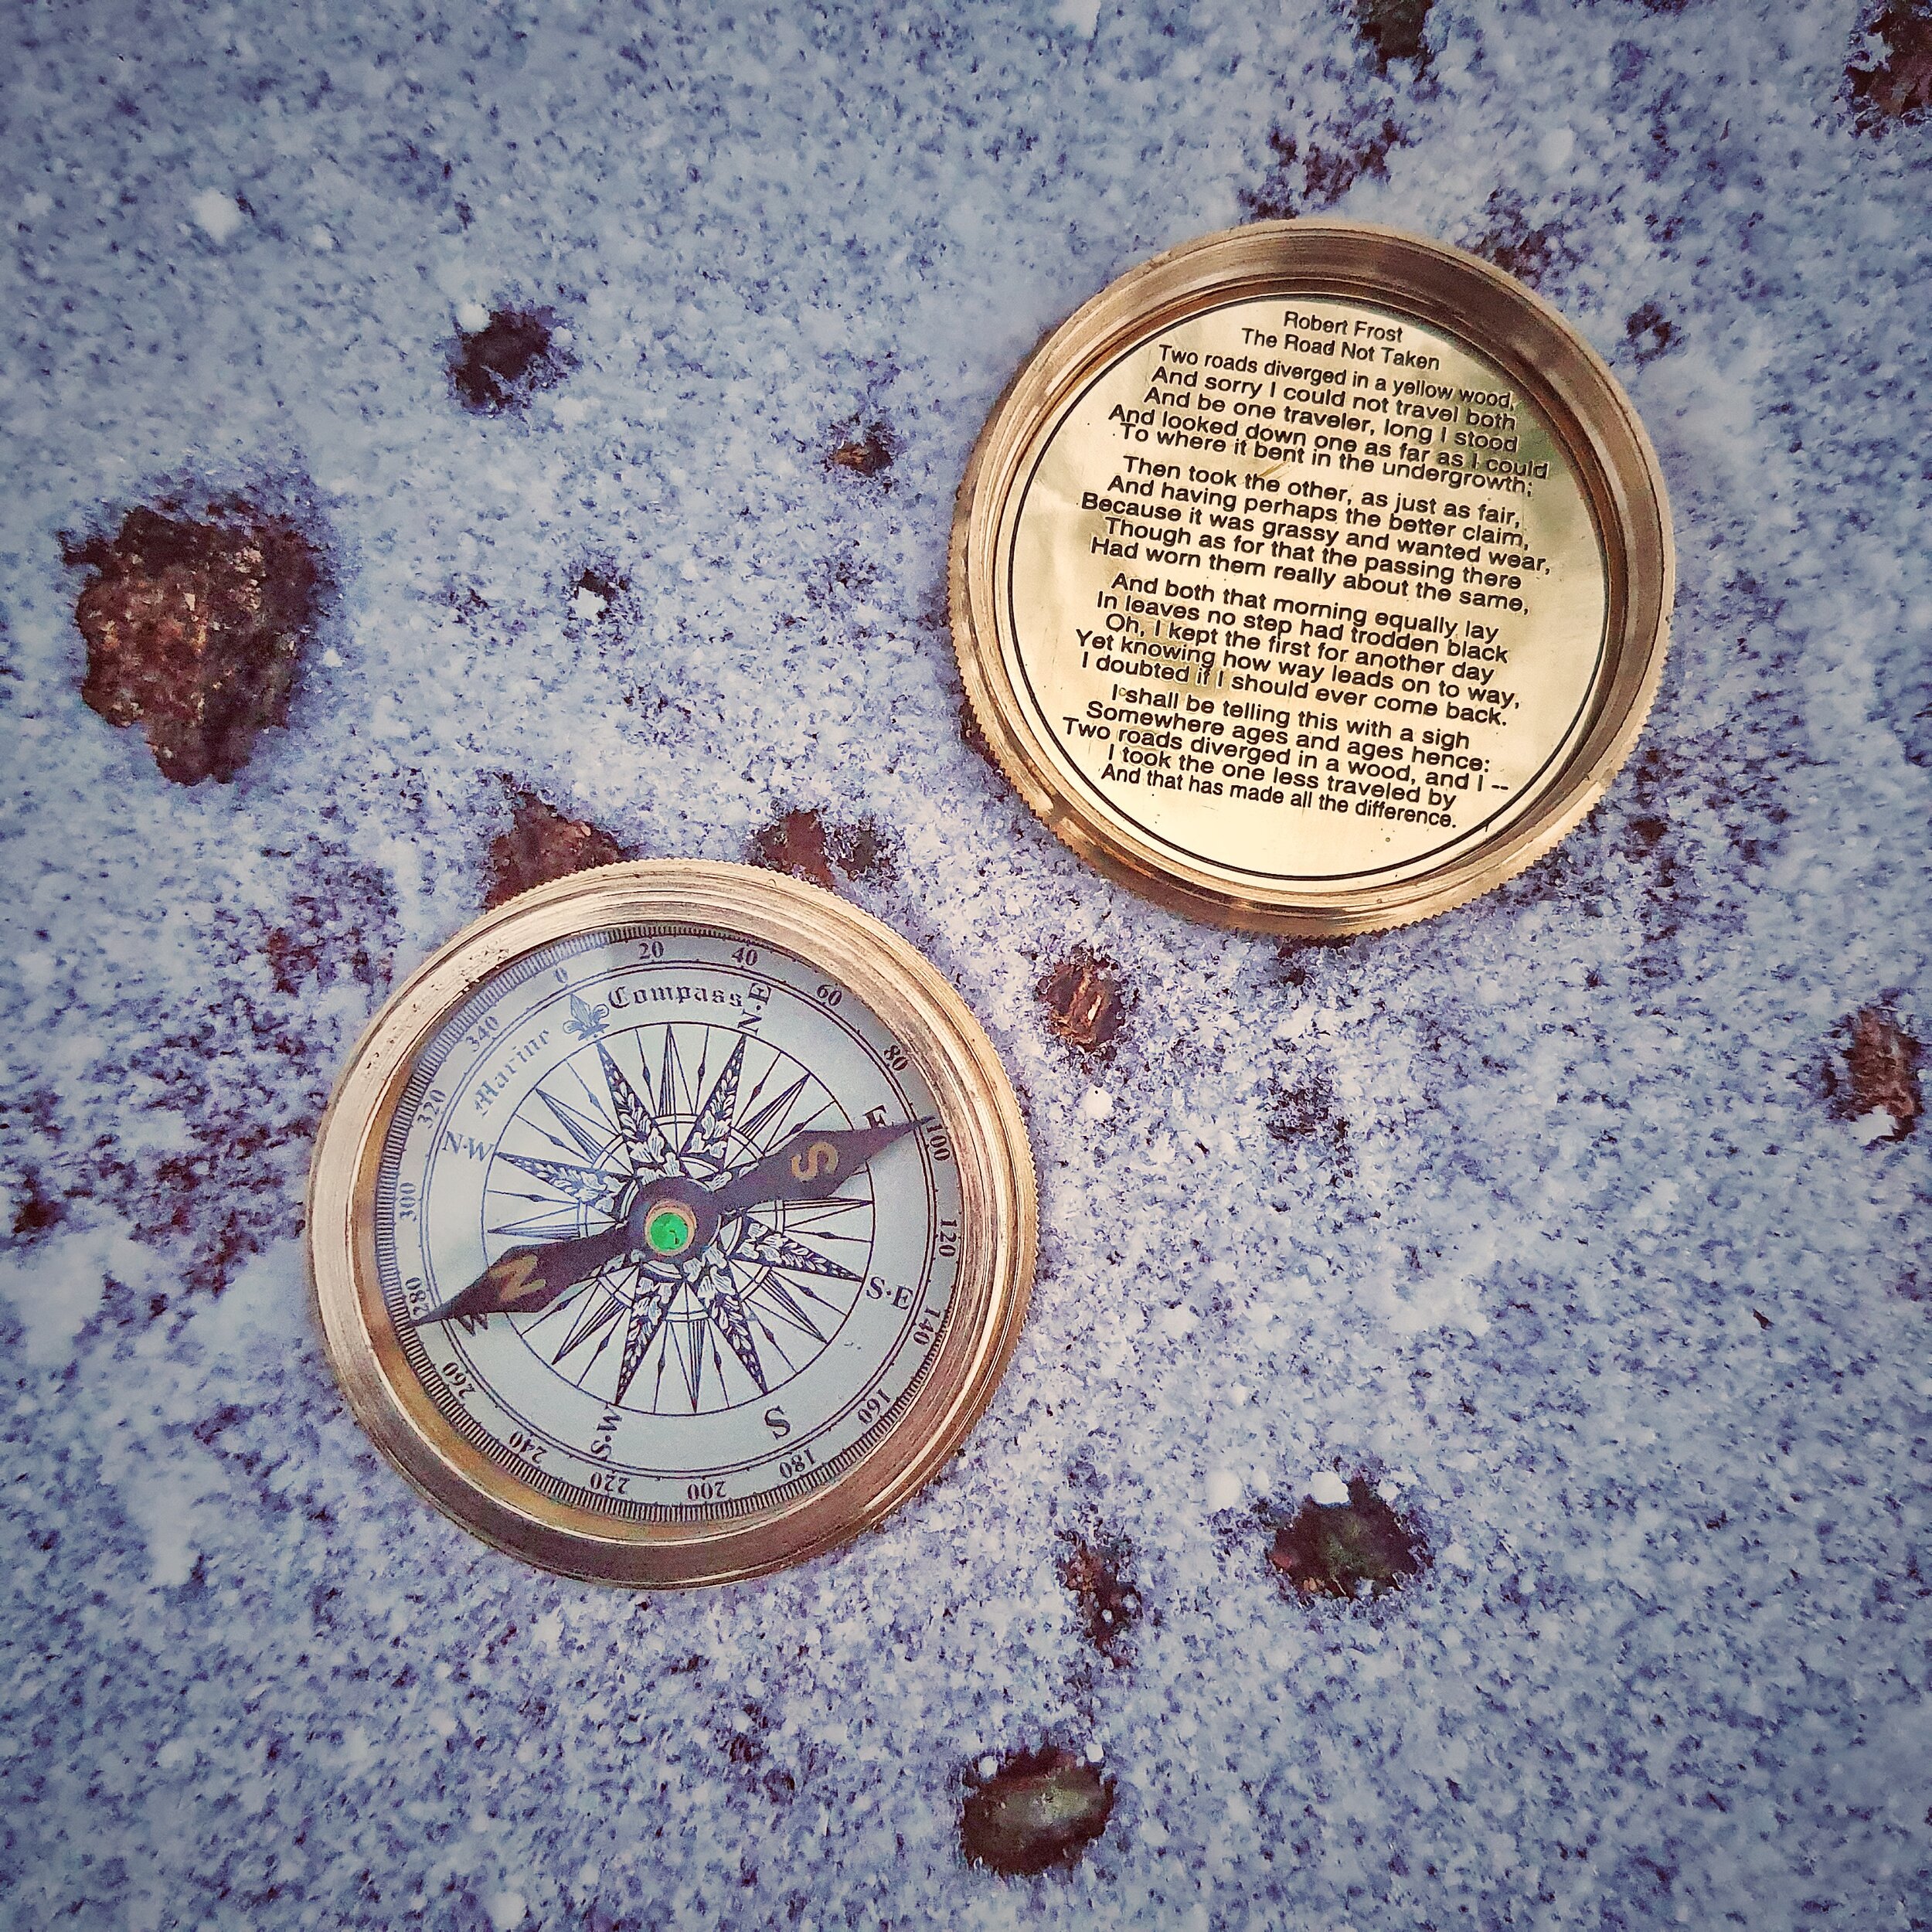 Antiqued Brass Compass Robert Frost's The Road Not Taken Poem With Leather Case 